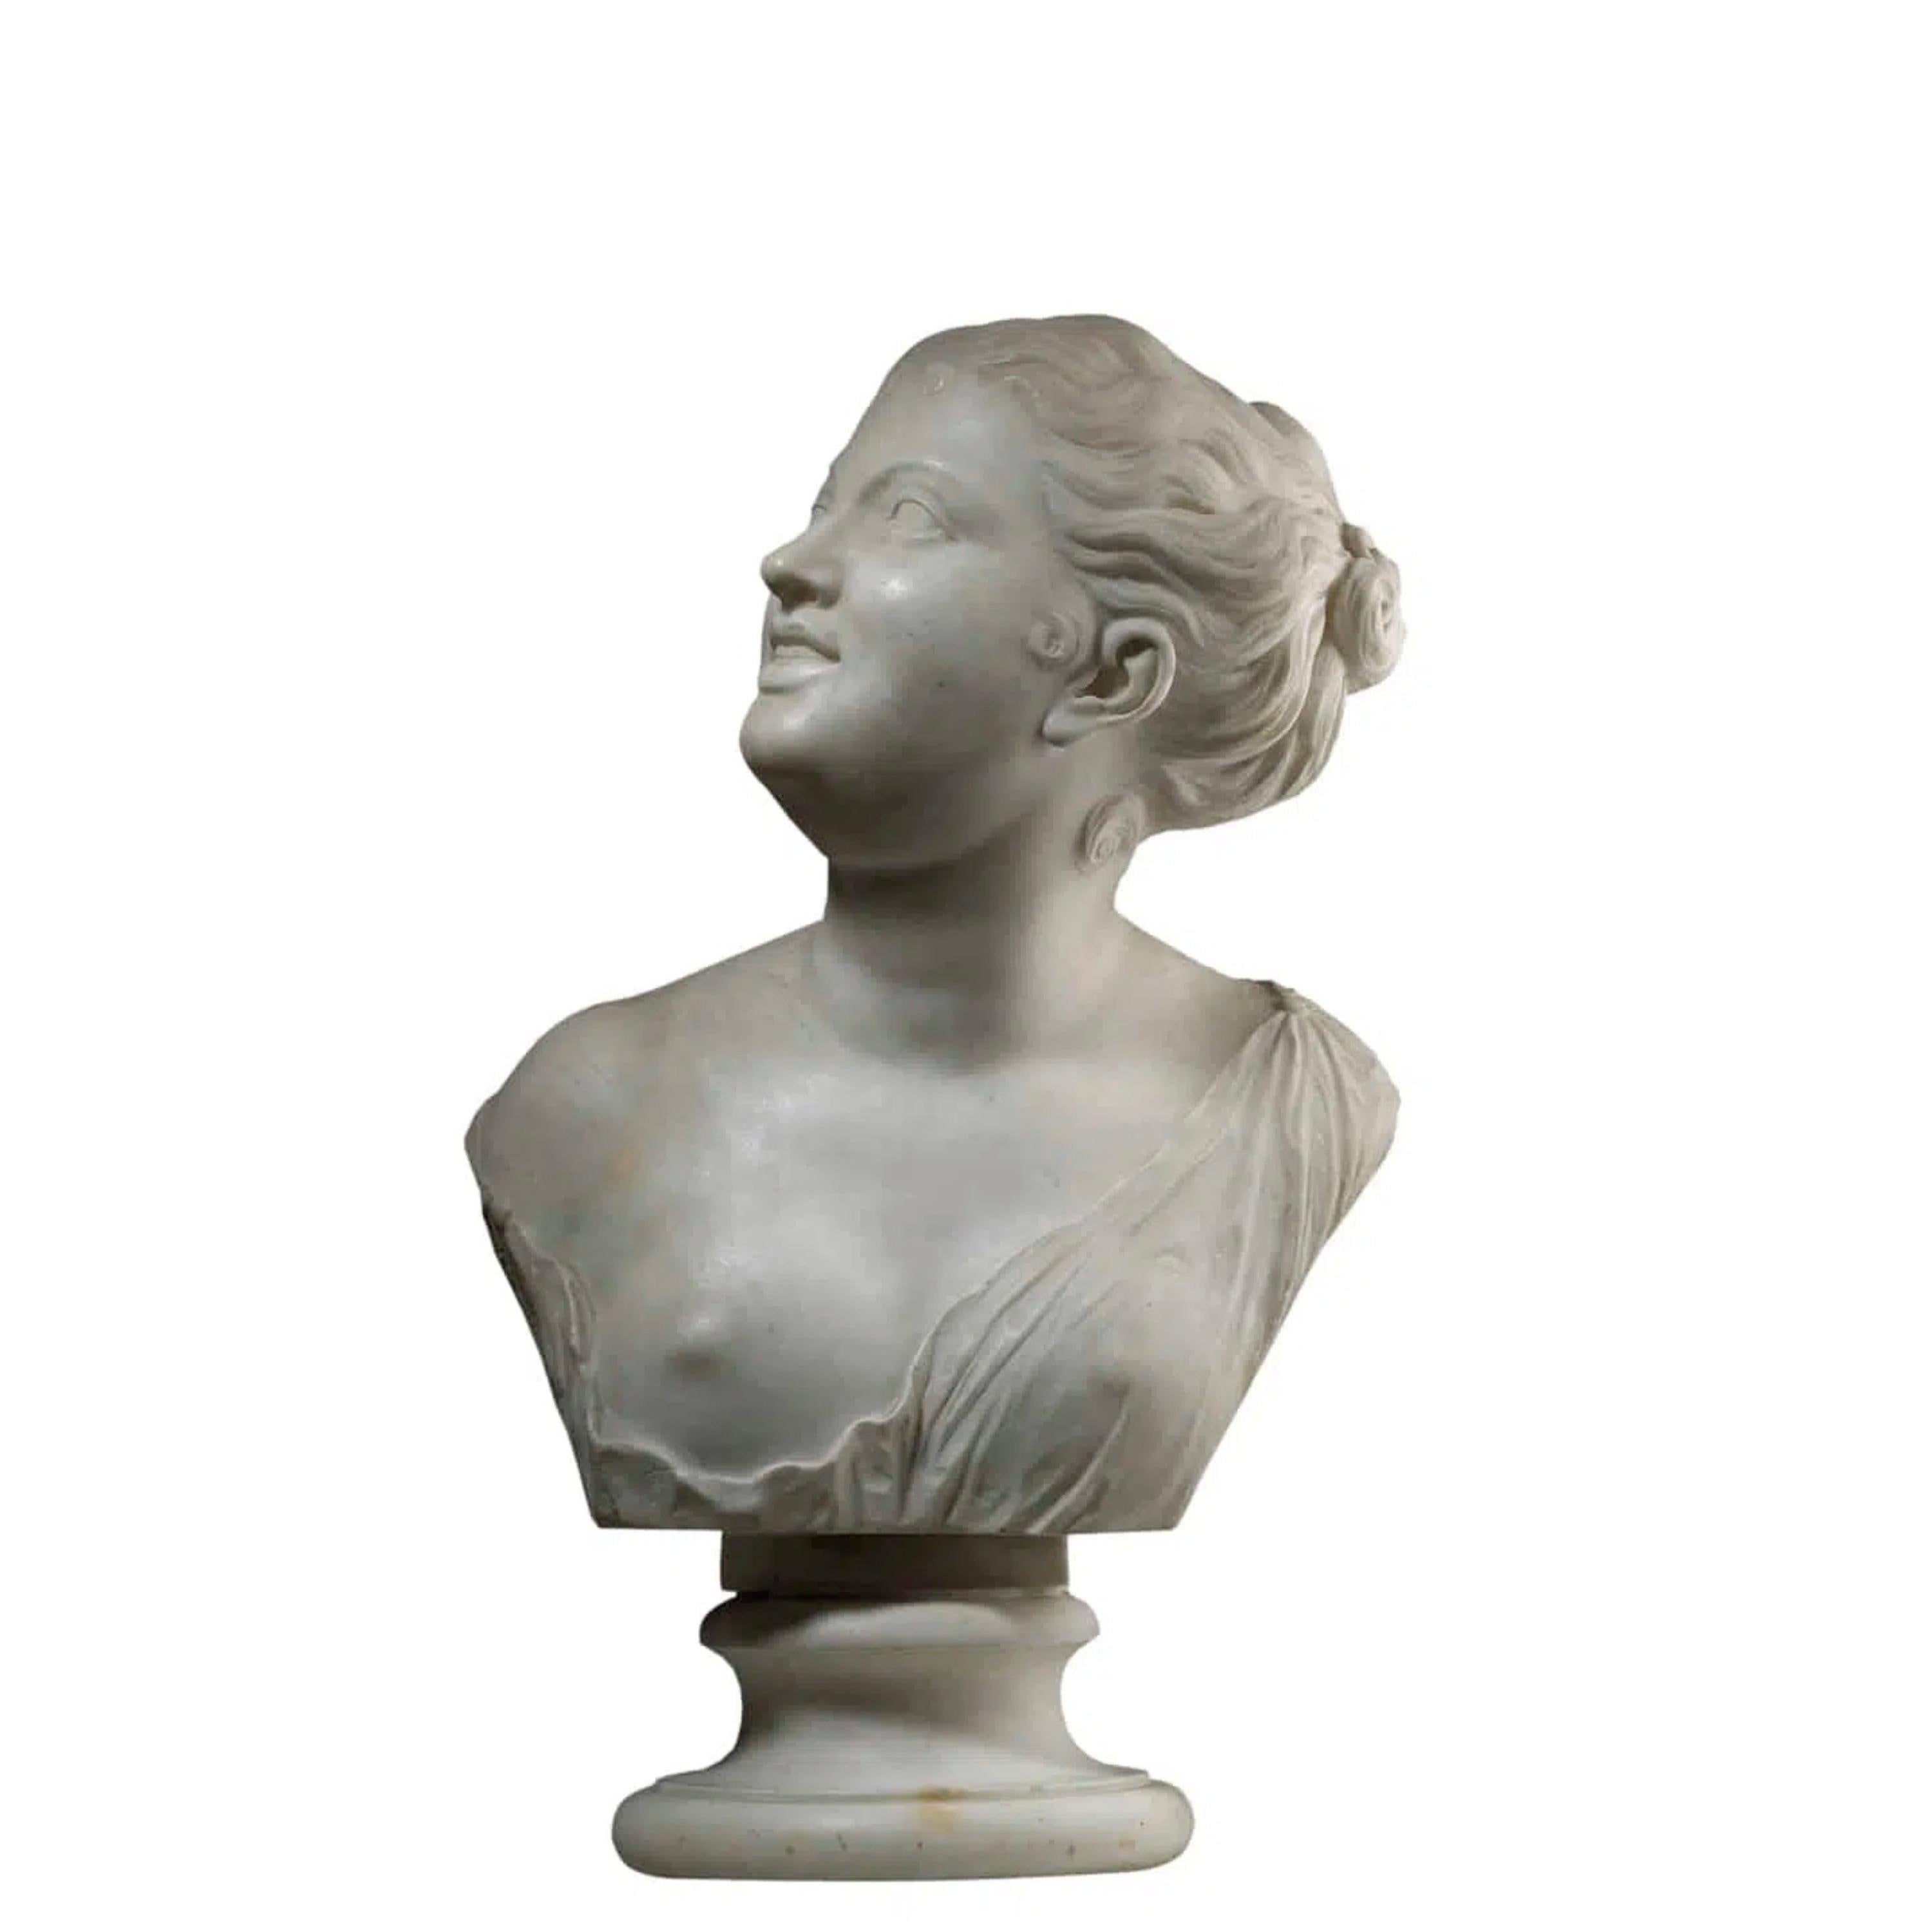 Italian 18th Century Marble Bust of a Girl

Late 18th century bust of a girl, in the manner of Luigi Valadier

Son of Andrea Valadier, a Provencal silversmith who moved to Rome in 1714, Luigi Valadier was the father of the silversmiths Filippo,